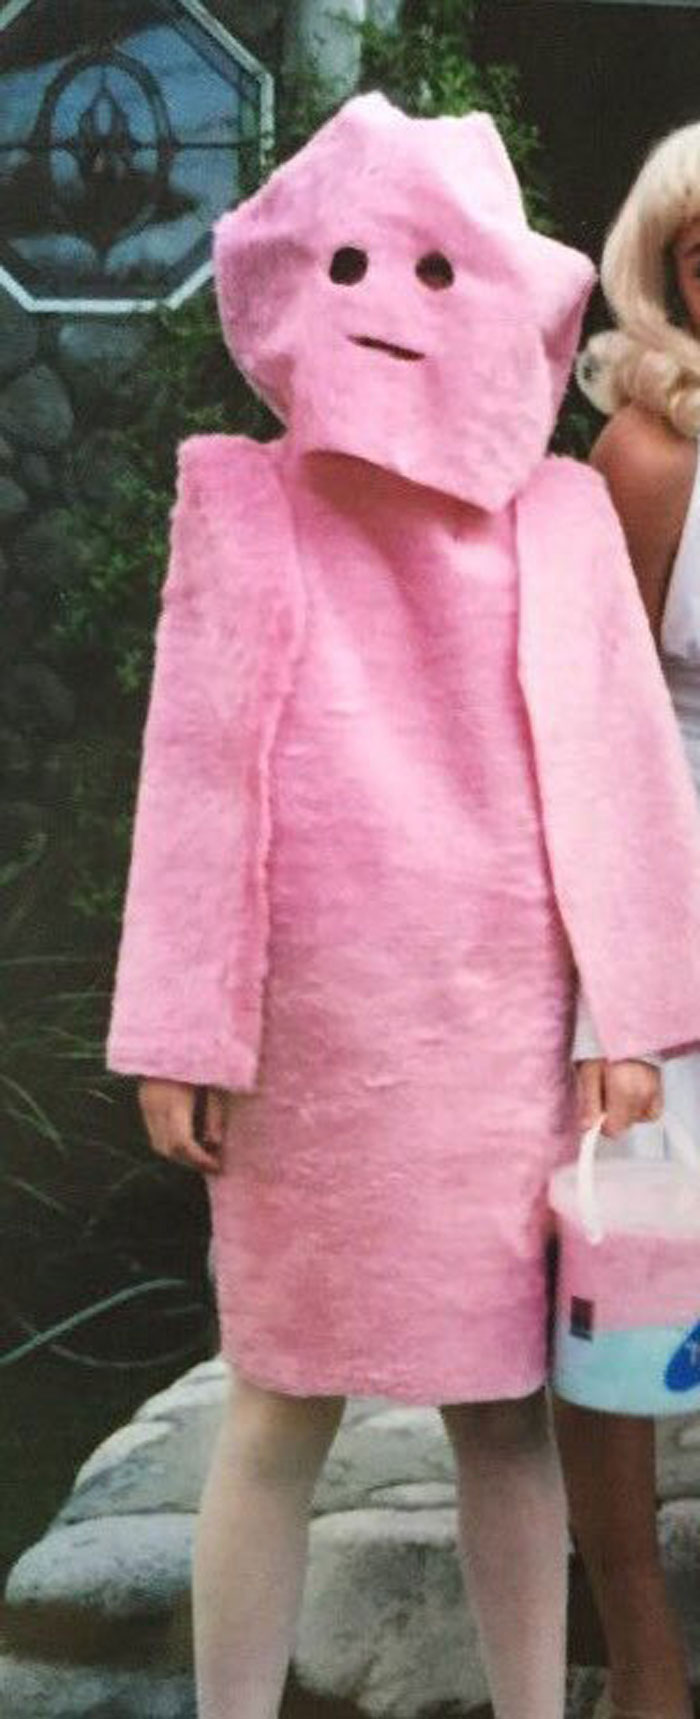 I Remembered The Time That I Wanted To Dress As “Cotton Candy” For Halloween And Handmade My Costume